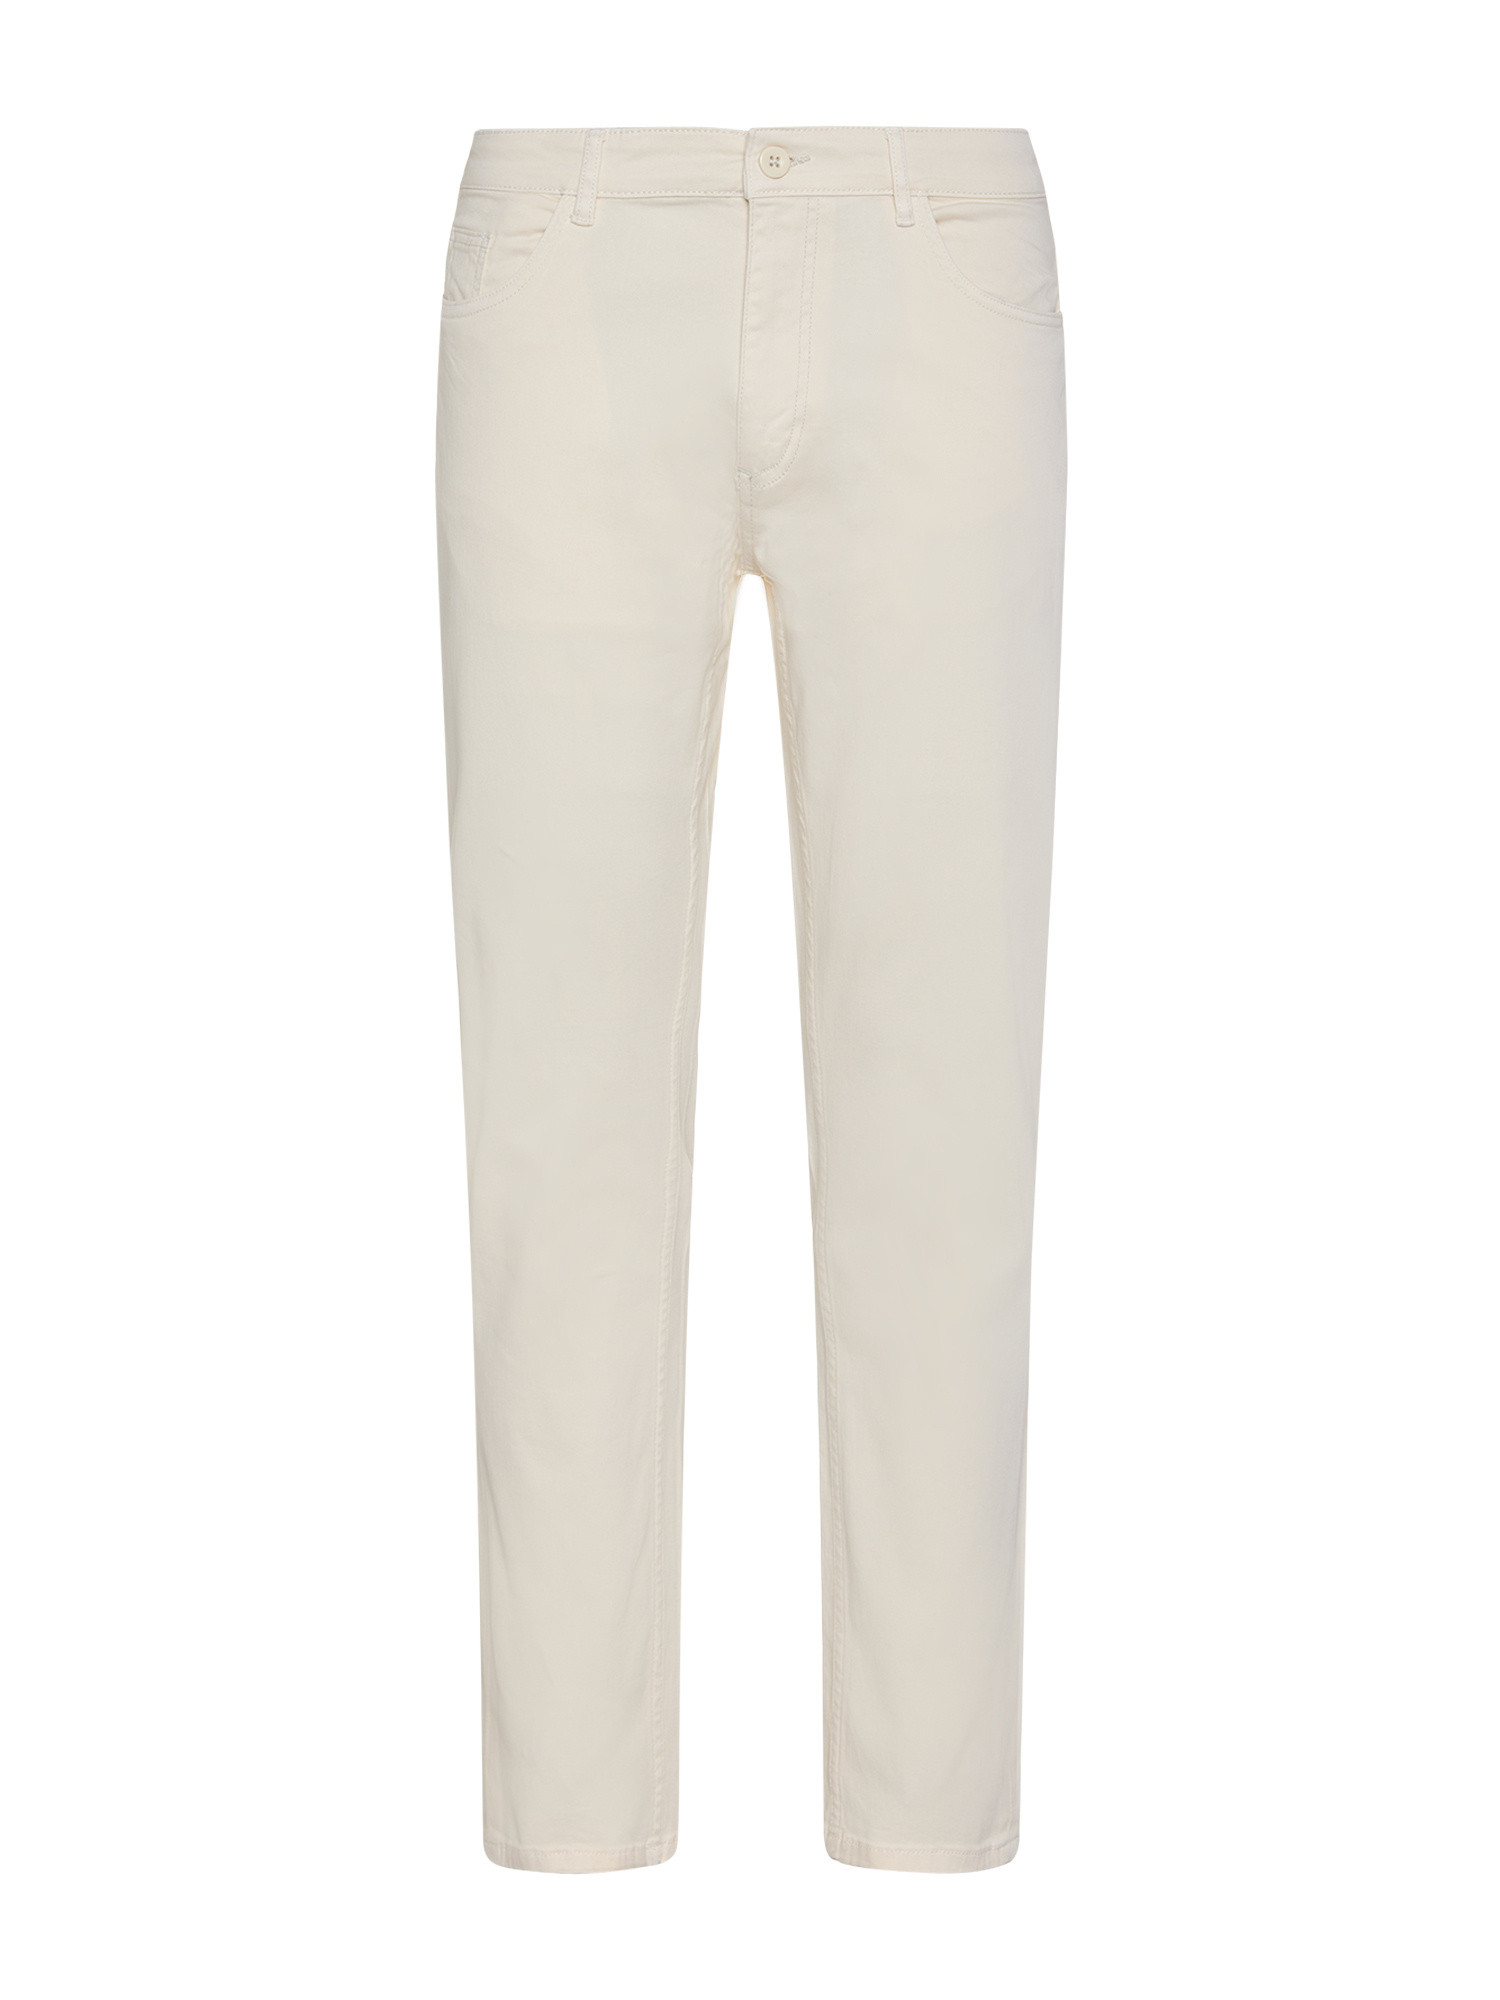 JCT - Slim fit five pocket trousers, White Cream, large image number 0